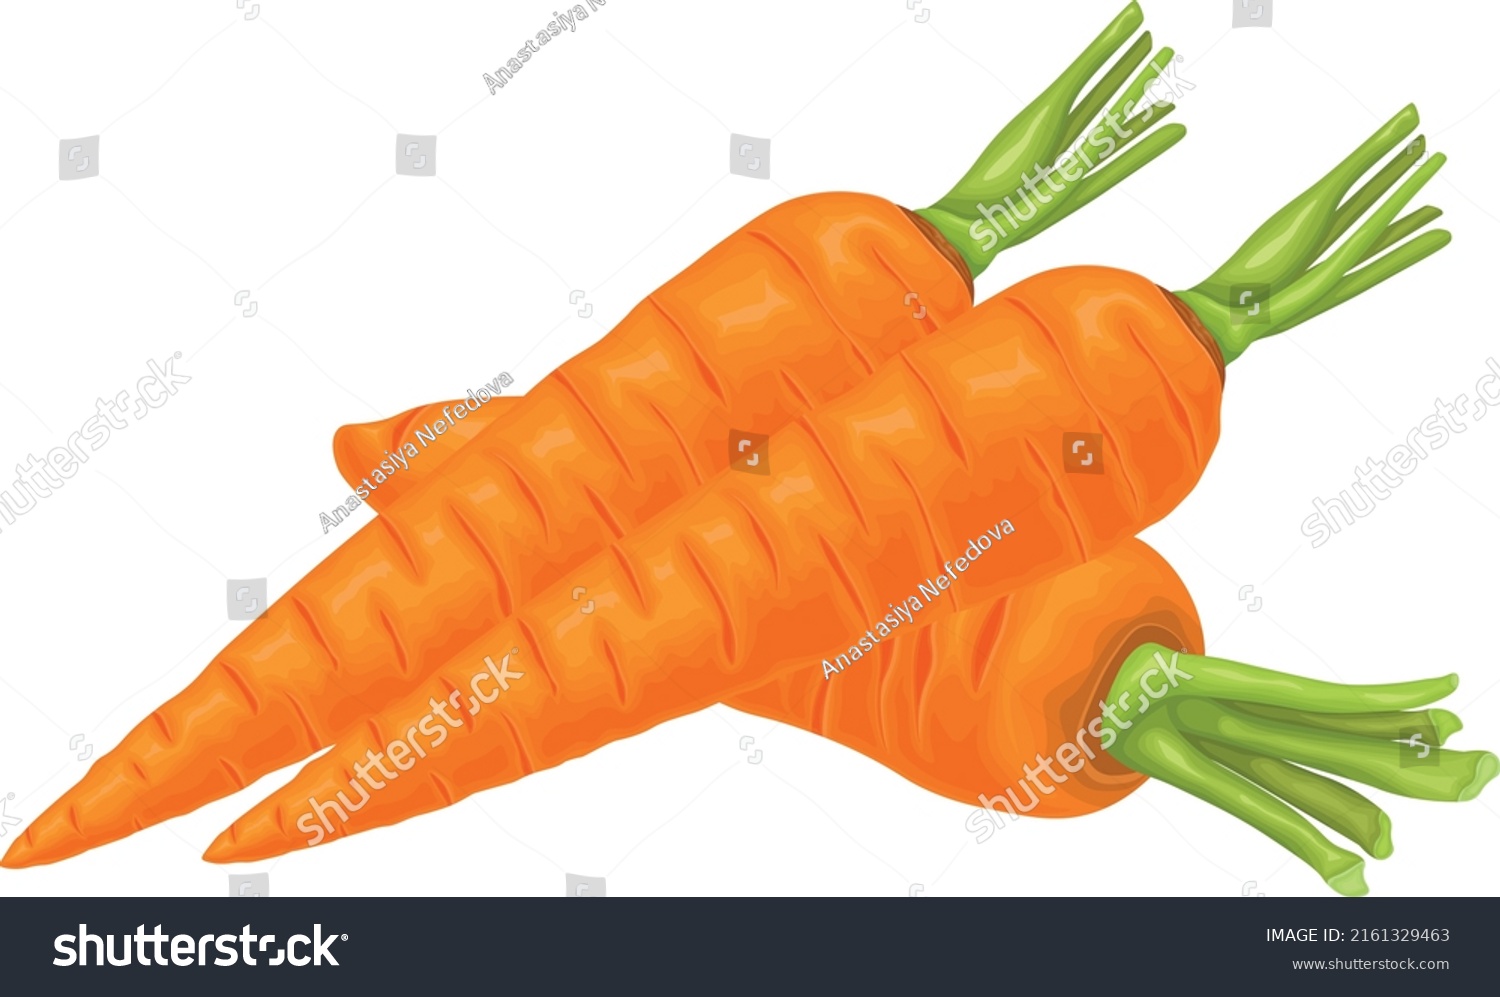 Carrot. Image of a ripe carrot. Vitamin vegetable. Organic food. Orange carrots. Vector illustration isolated on a white background #2161329463